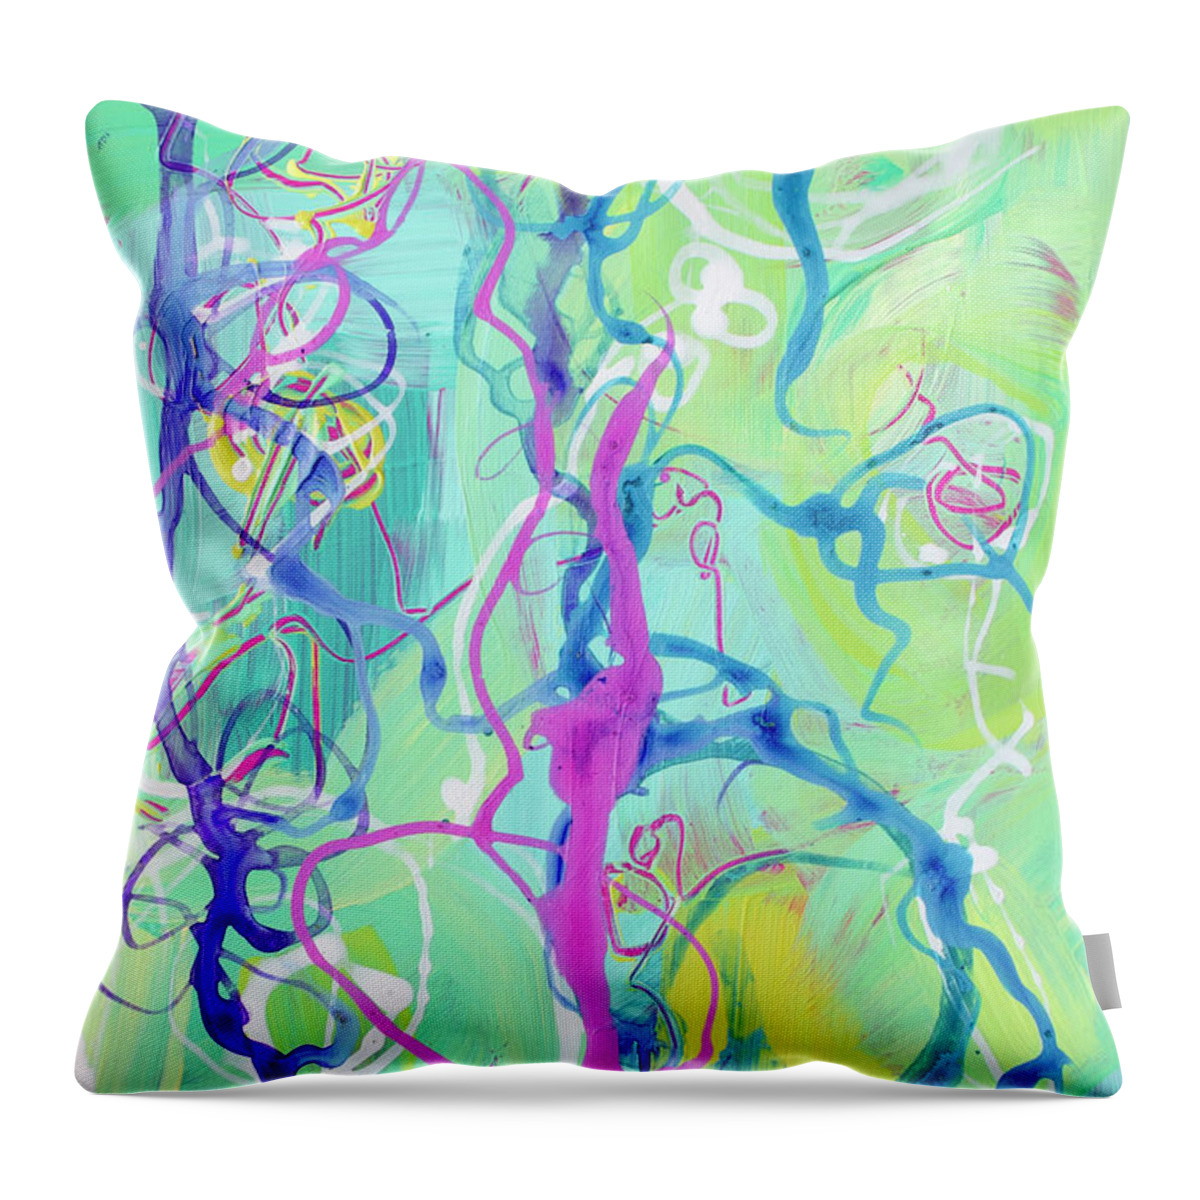 Modern Abstract Art Throw Pillow featuring the painting Contemporary Abstract - Crossing Paths No. 2 - Modern Artwork Painting by Patricia Awapara